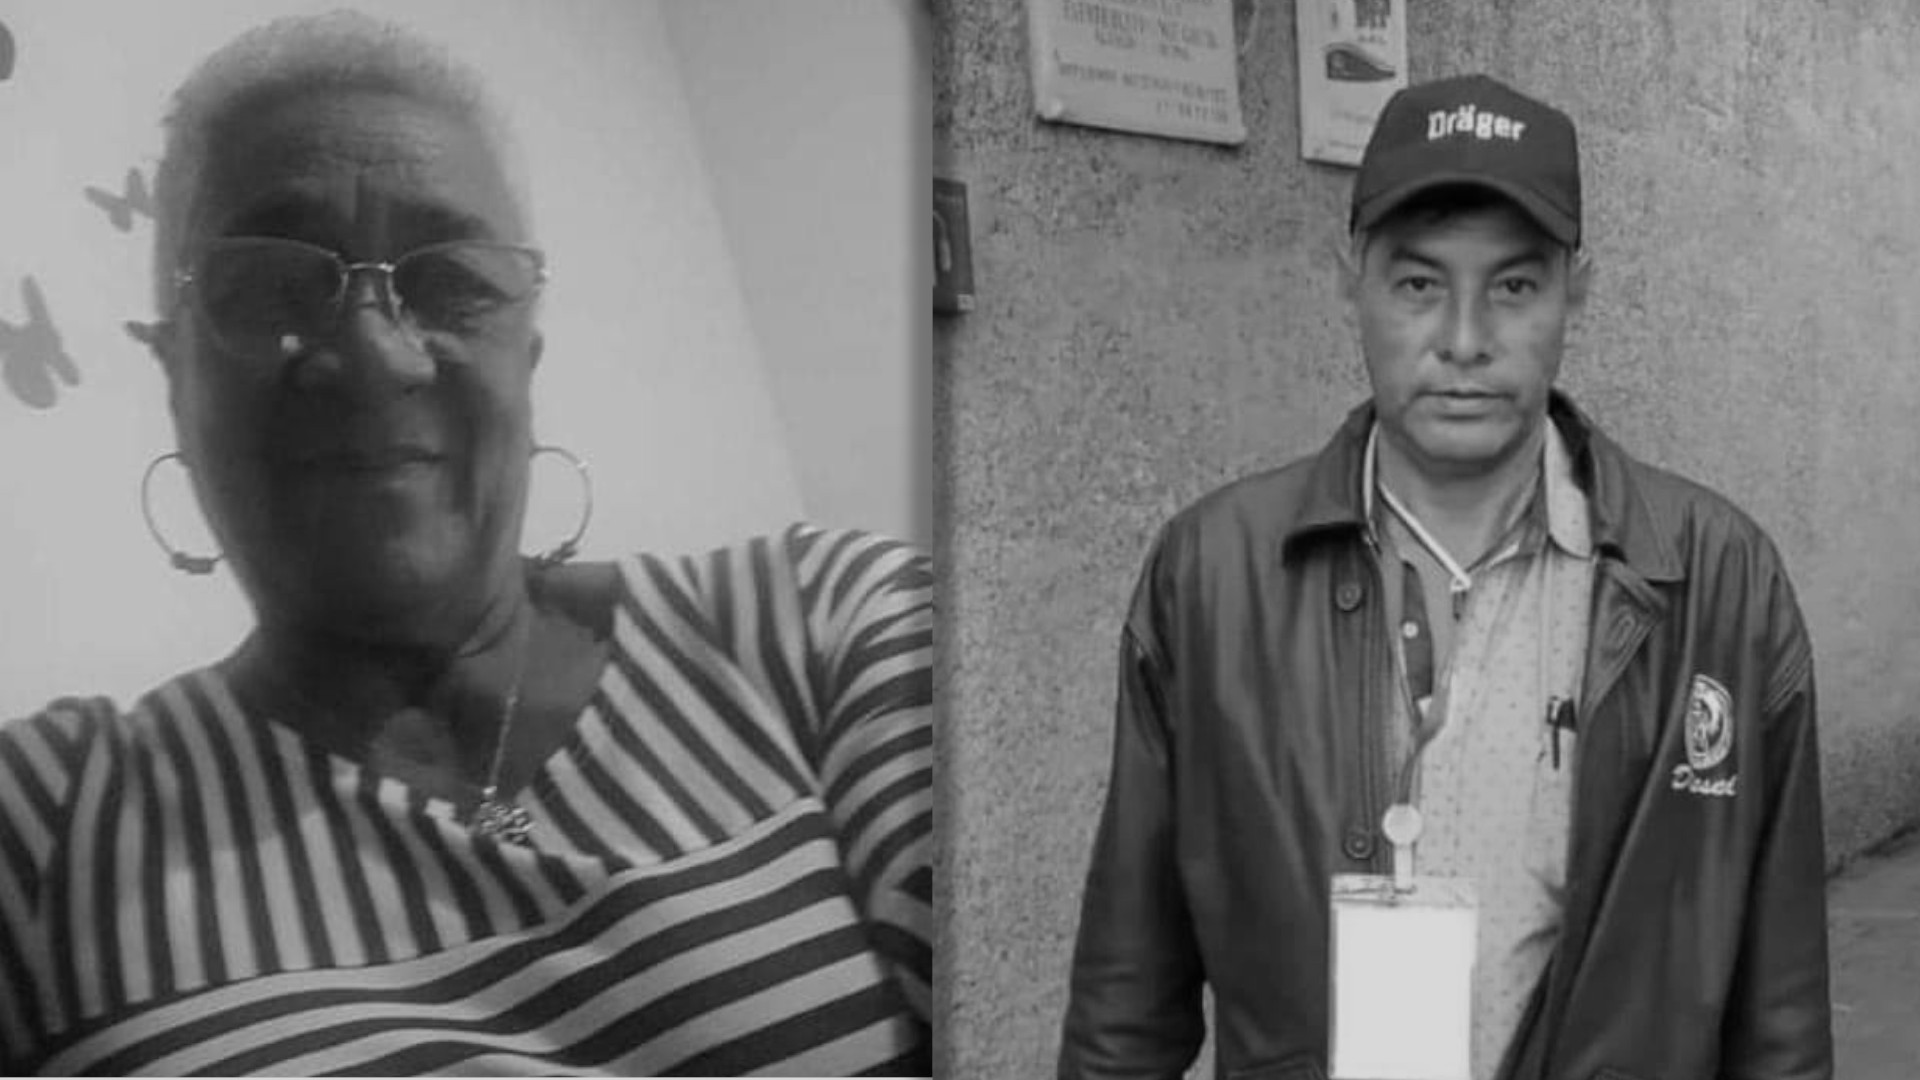 With the murders of Mariela Marínez Gaviria in Tumaco (Nariño) and Gonzalo de Jesús Parra in Maripí (Boyacá), there are 34 social leaders murdered in the first quarter of 2023, according to Indepaz figures.  (Indepaz)